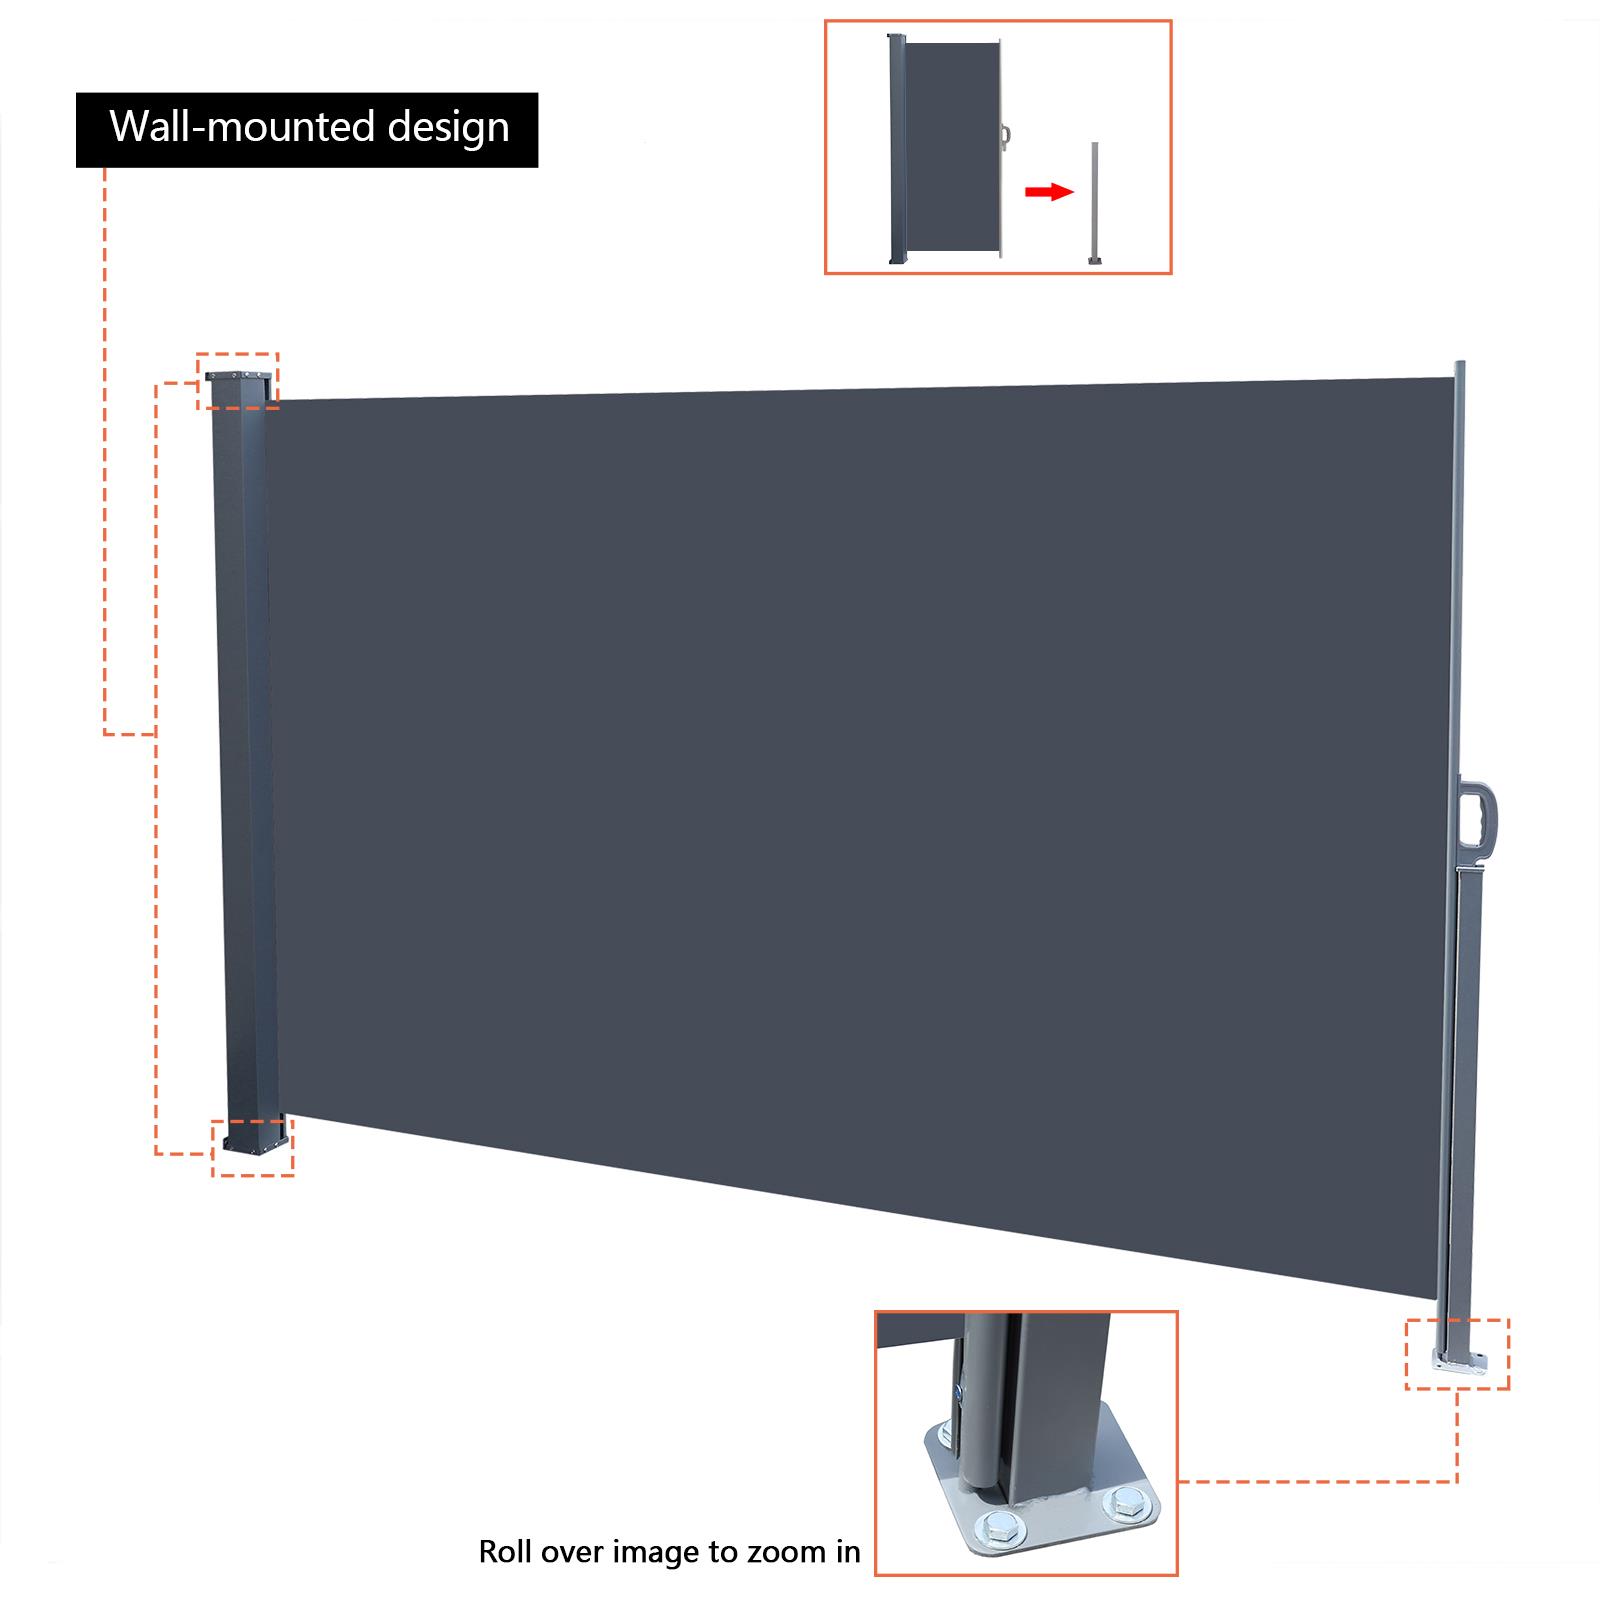 Ktaxon 71" x 118" Retractable Side Awning Wind Screen Privacy Divider-Gray - image 3 of 5